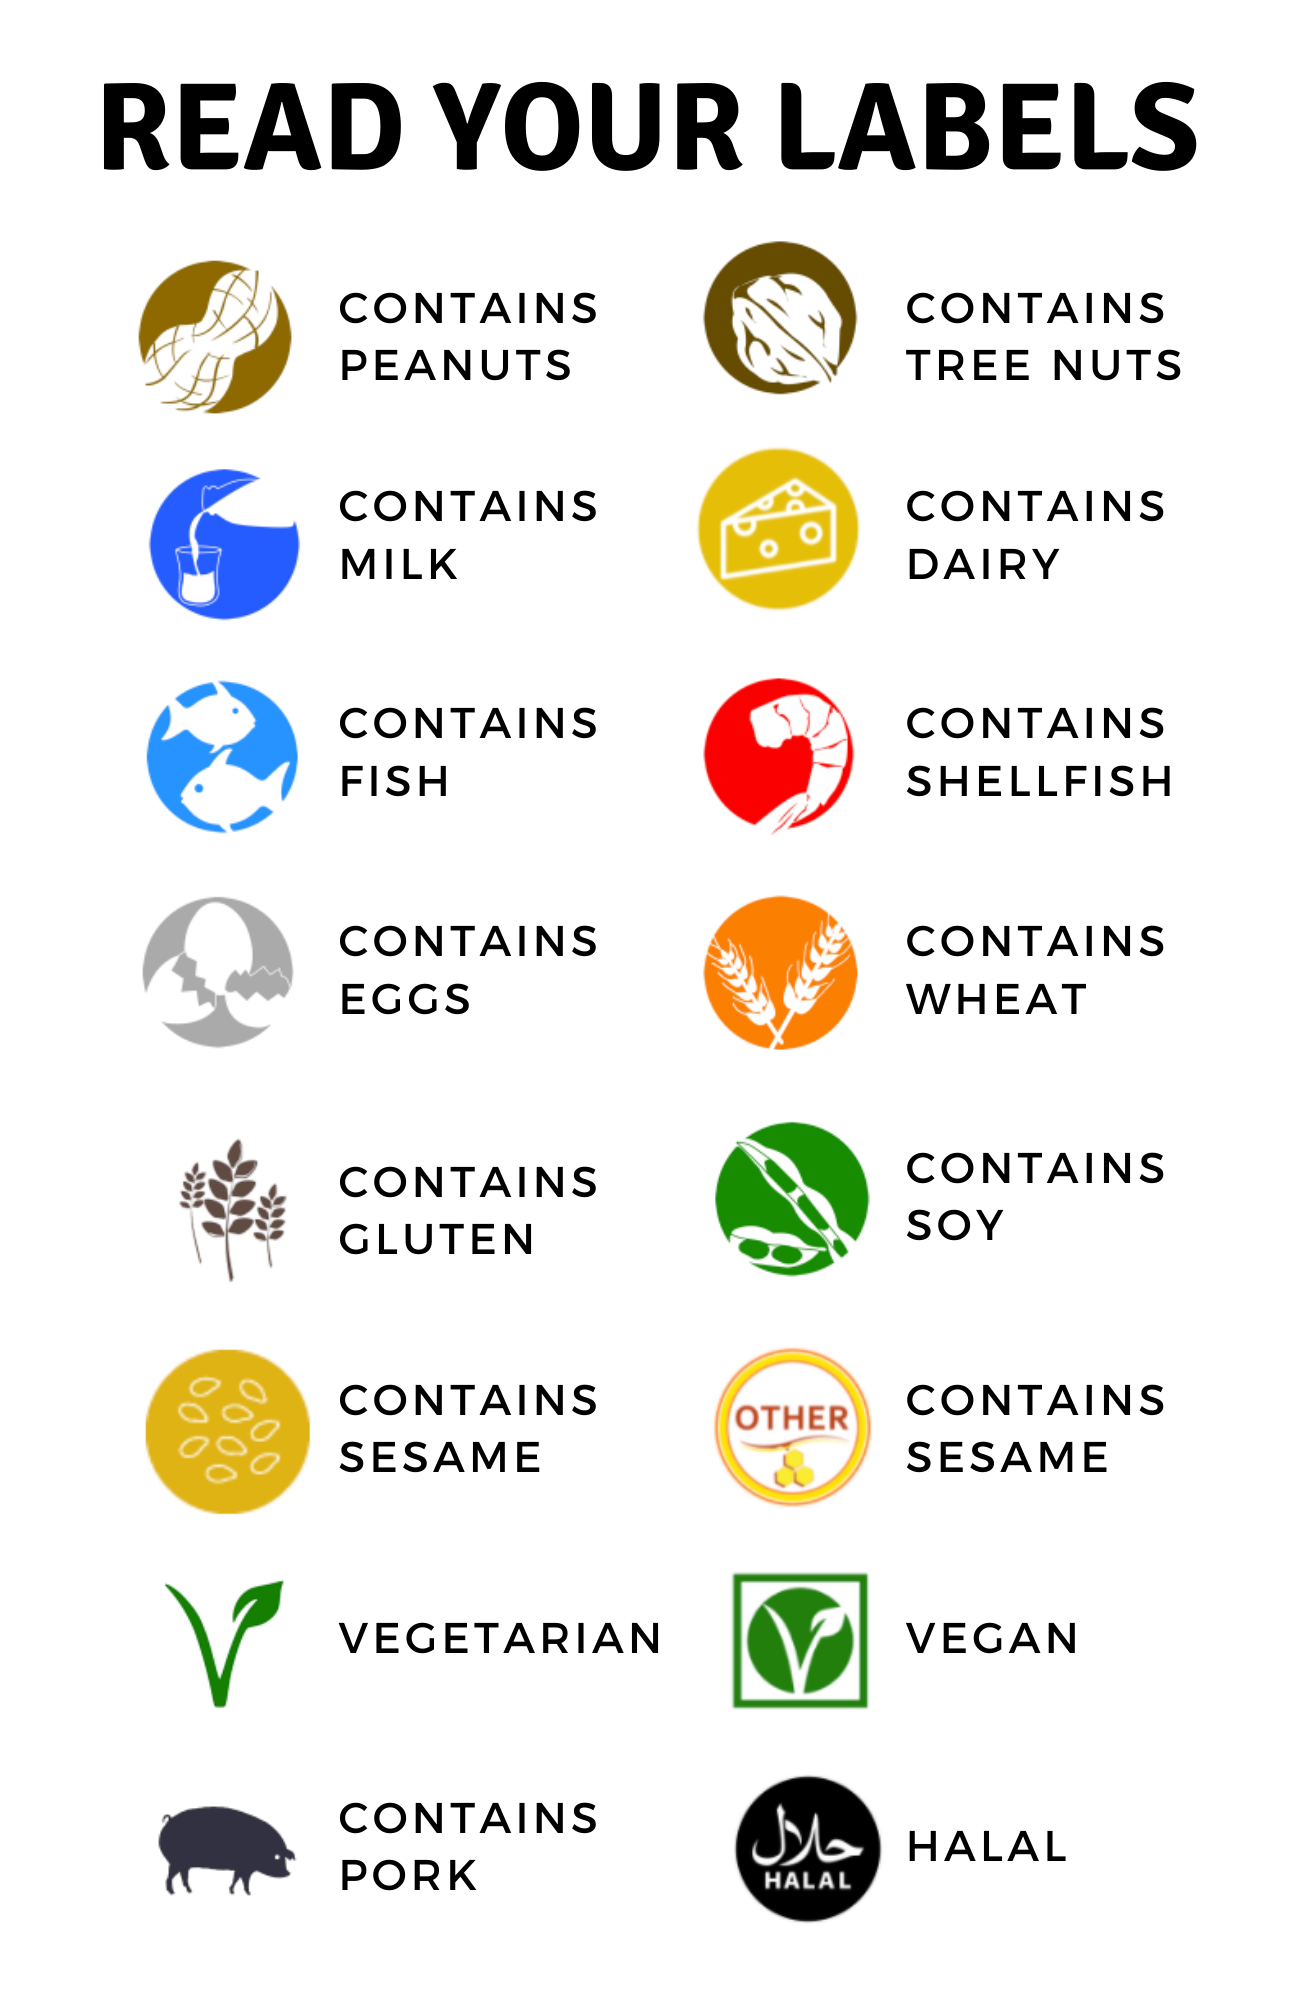 Read Your Labels Image with Allergen Icons and Labels